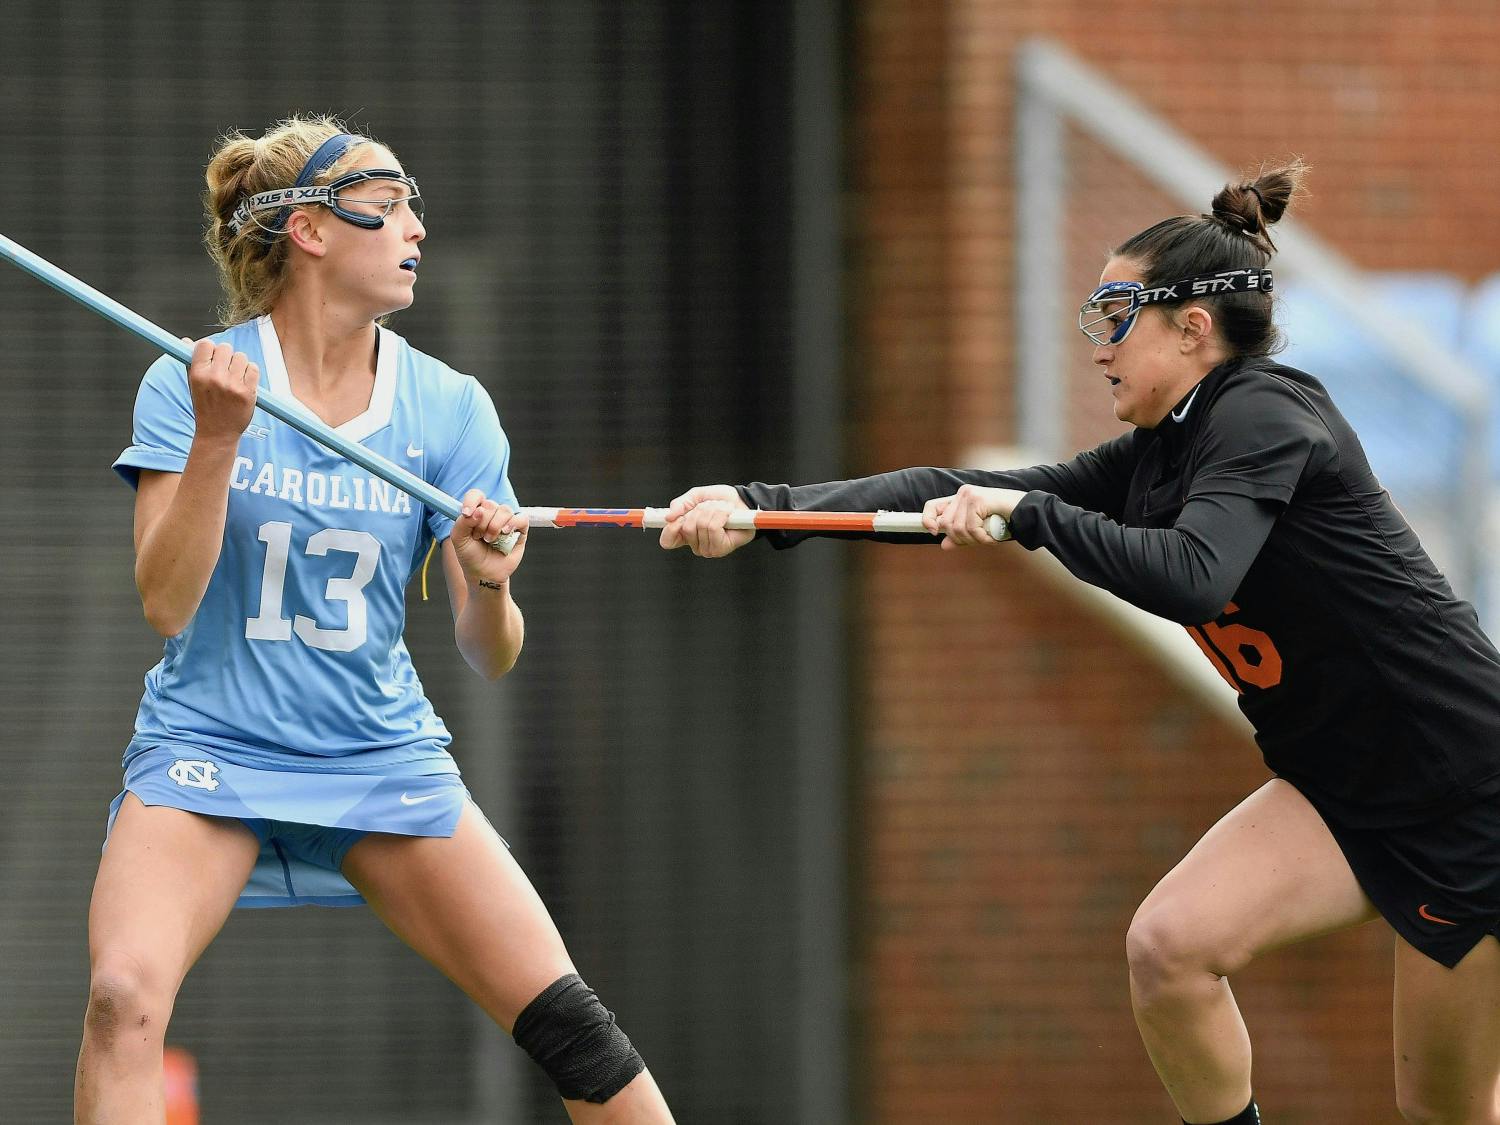 UNC's Caitlyn Wurzburger (13) looks to pass the ball during a game against Florida at Dorrance Field on Friday, February 19, 2021. Photo courtesy of Dana Gentry.